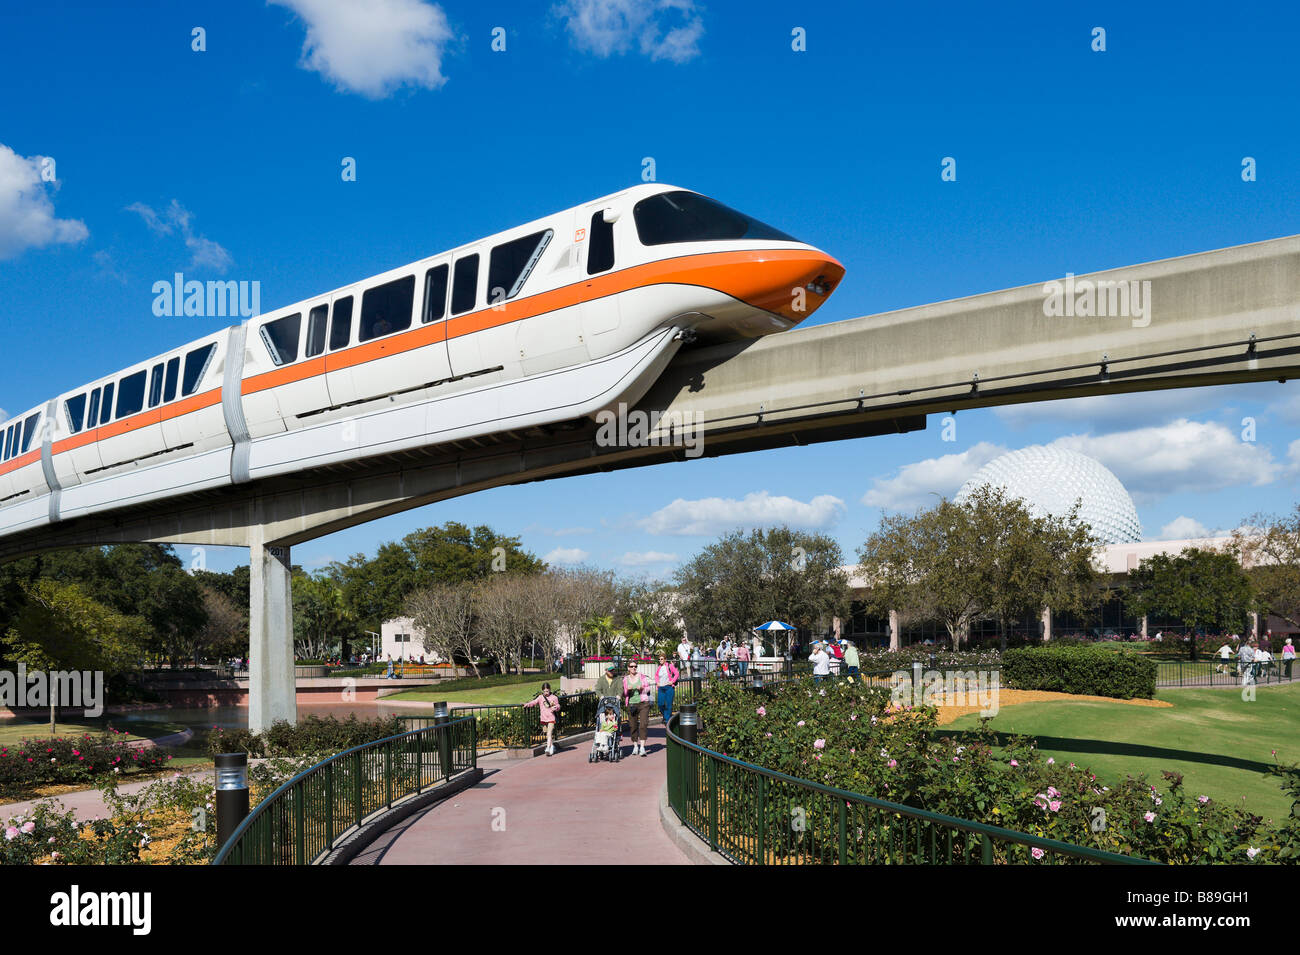 Monorail in front of the geodesic sphere of Spaceship Earth, Epcot Center, Walt Disney World Resort, Orlando, Florida, USA Stock Photo